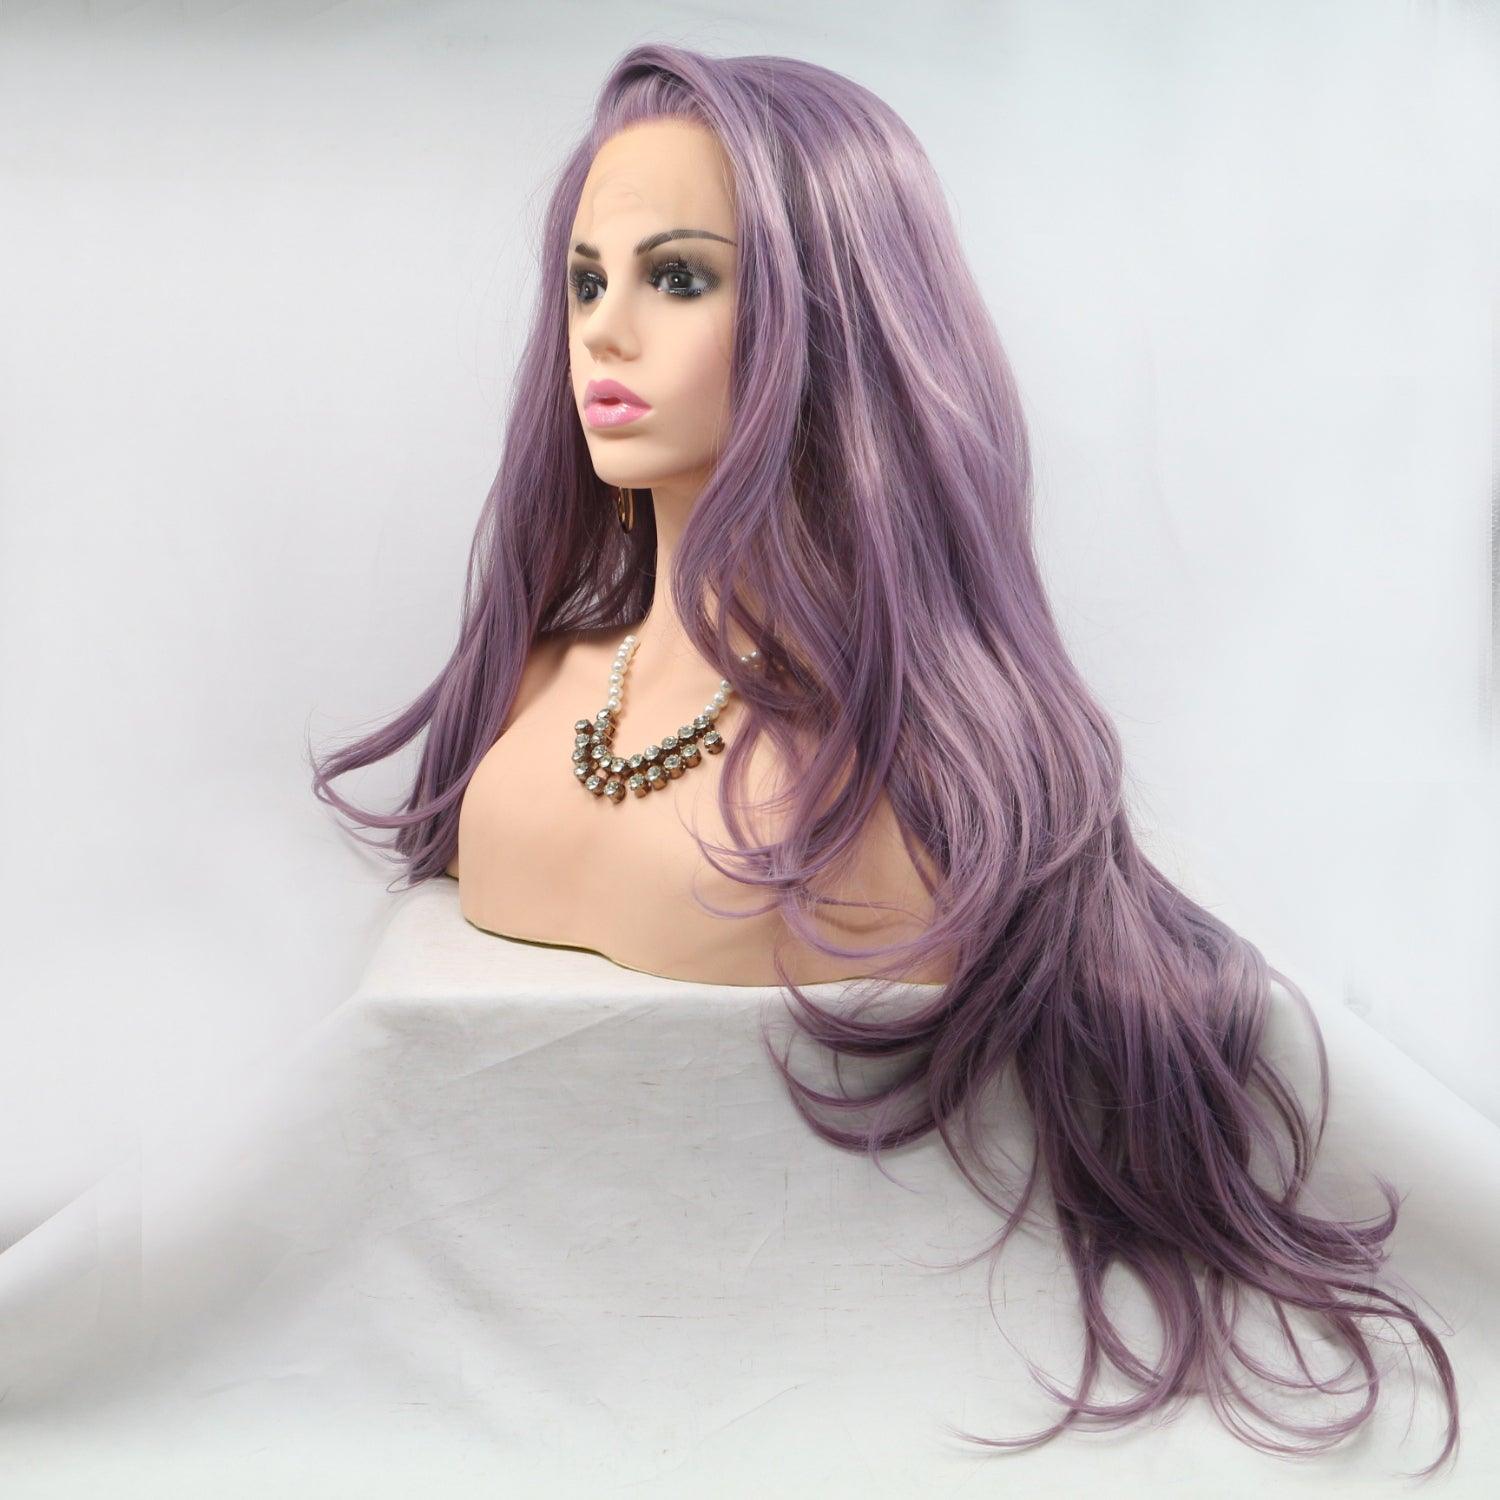 a wig with long purple hair on a mannequin head